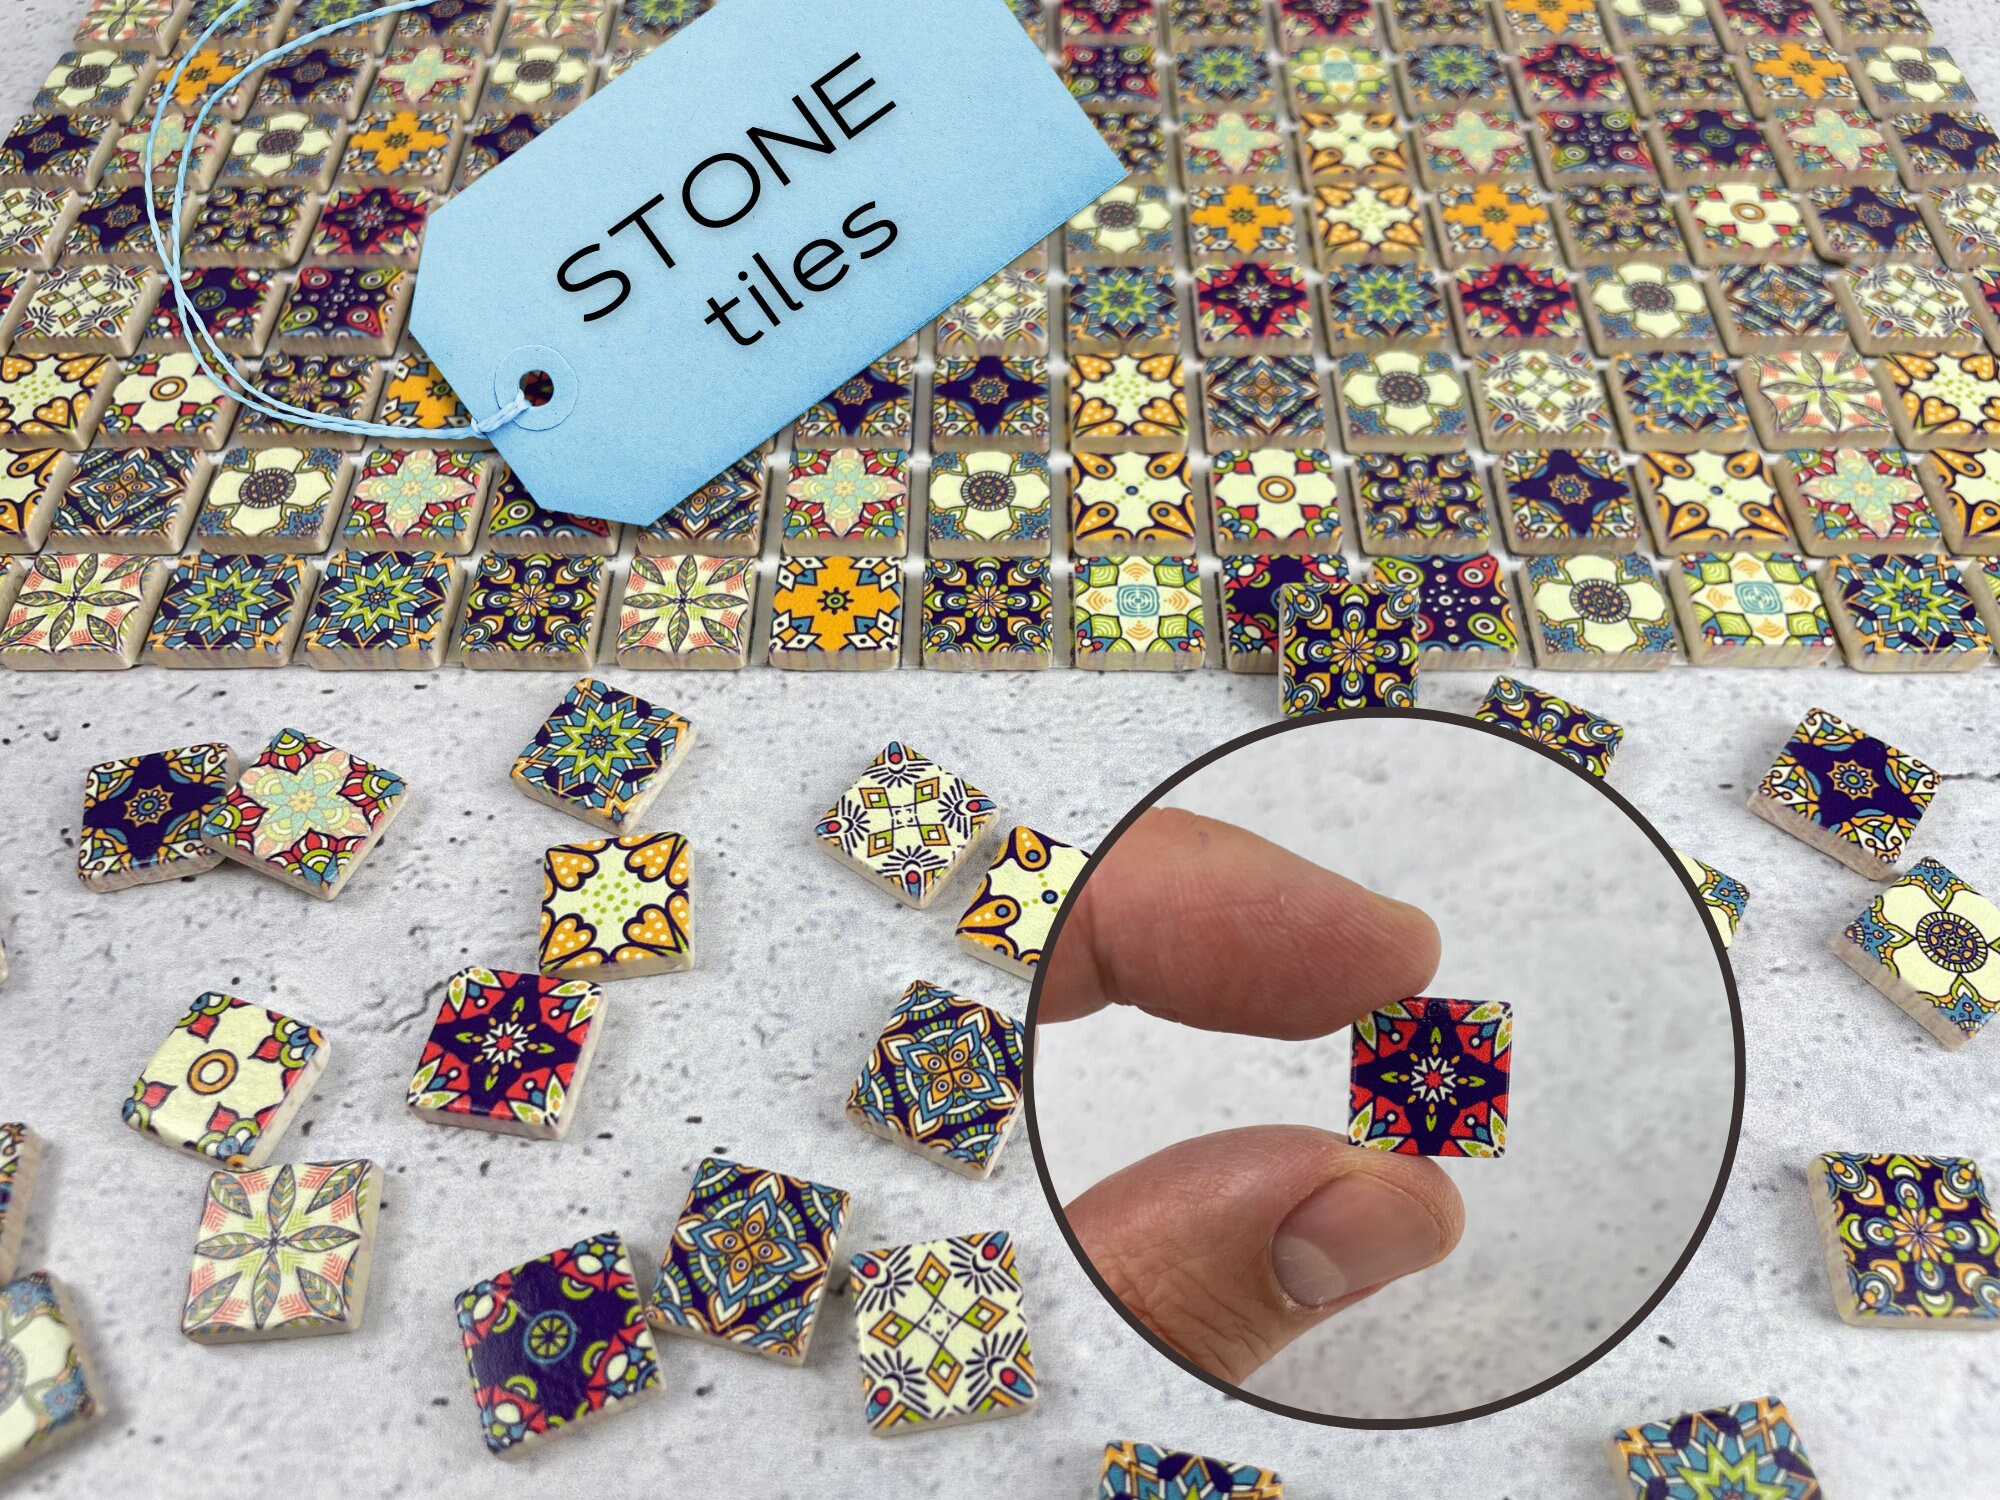 1000 Pcs Mini Diamond Shape Mirror Tiles for Crafts,1 x 0.5 Inch Rhombus  Mini Mosaic Tiles Small Mirror Pieces Glass Tiles for Wall Home Decoration